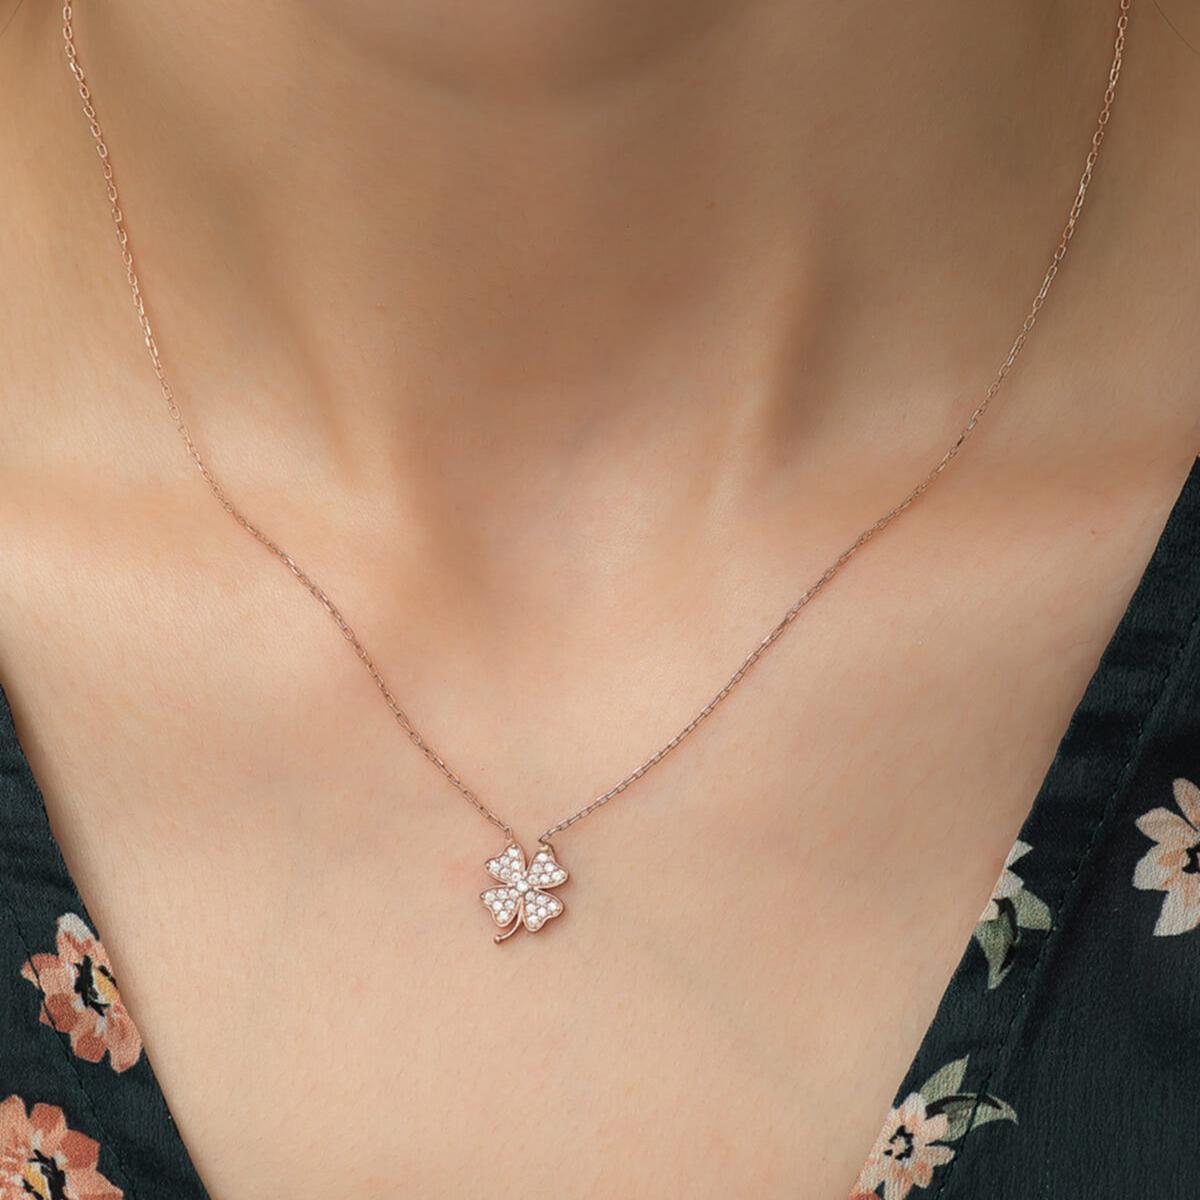 Tiny Four Leaf Clover Necklace • Minimalist Lucky Clover Necklace - Trending Silver Gifts